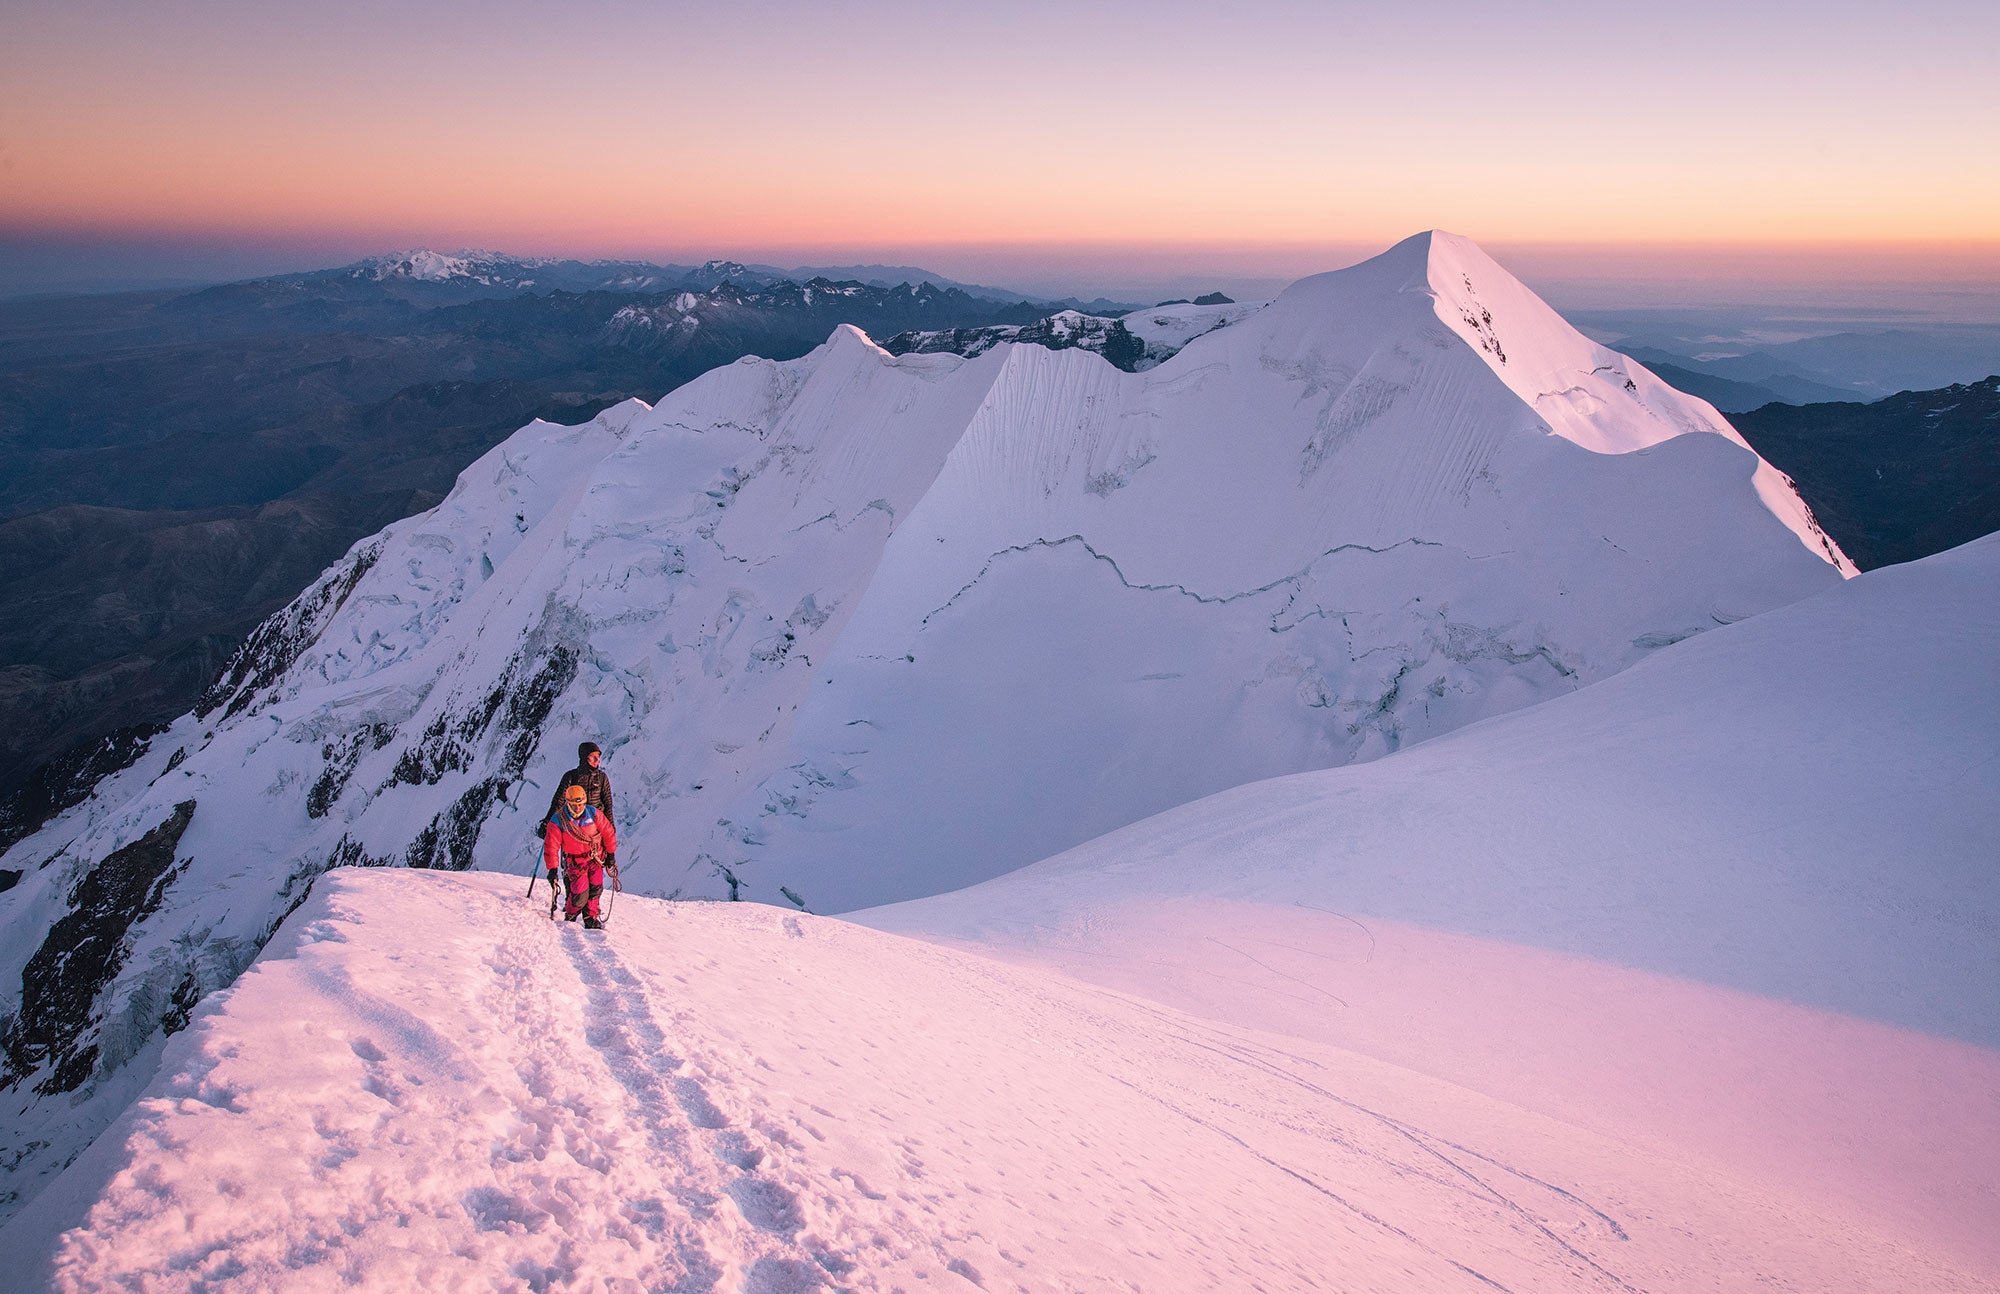 How to Stay Safe While Hiking Mountains in Winter